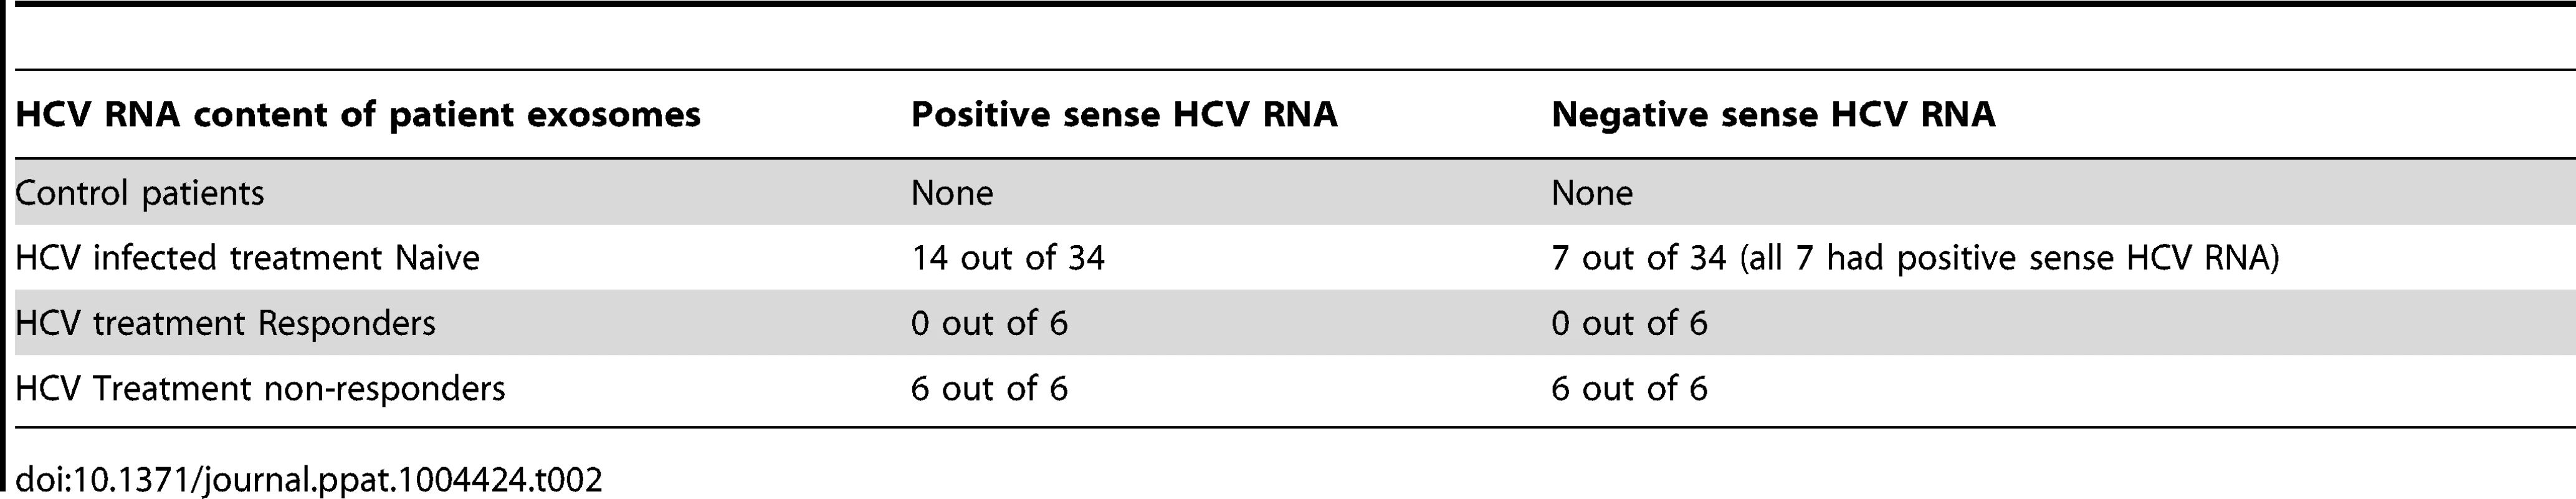 HCV RNA content of patient exosomes.